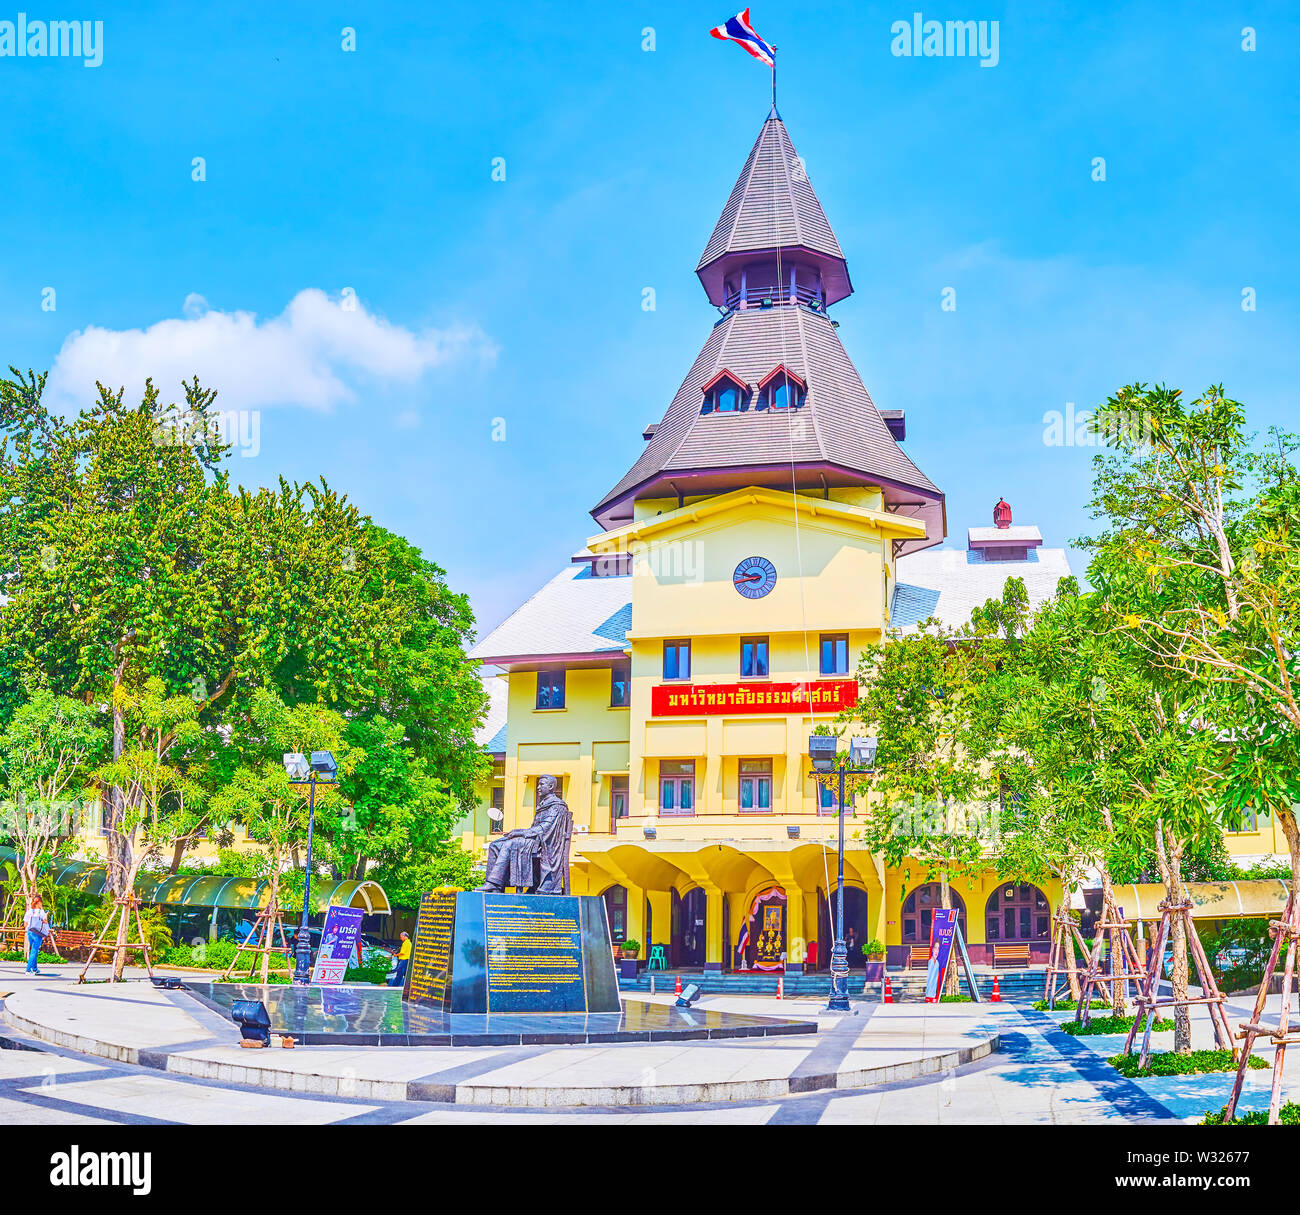 BANGKOK, THAILAND - APRIL 22, 2019: The beautiful administrative building of Tammasat University with a monument to Pridi Banomyong in the middle of s Stock Photo